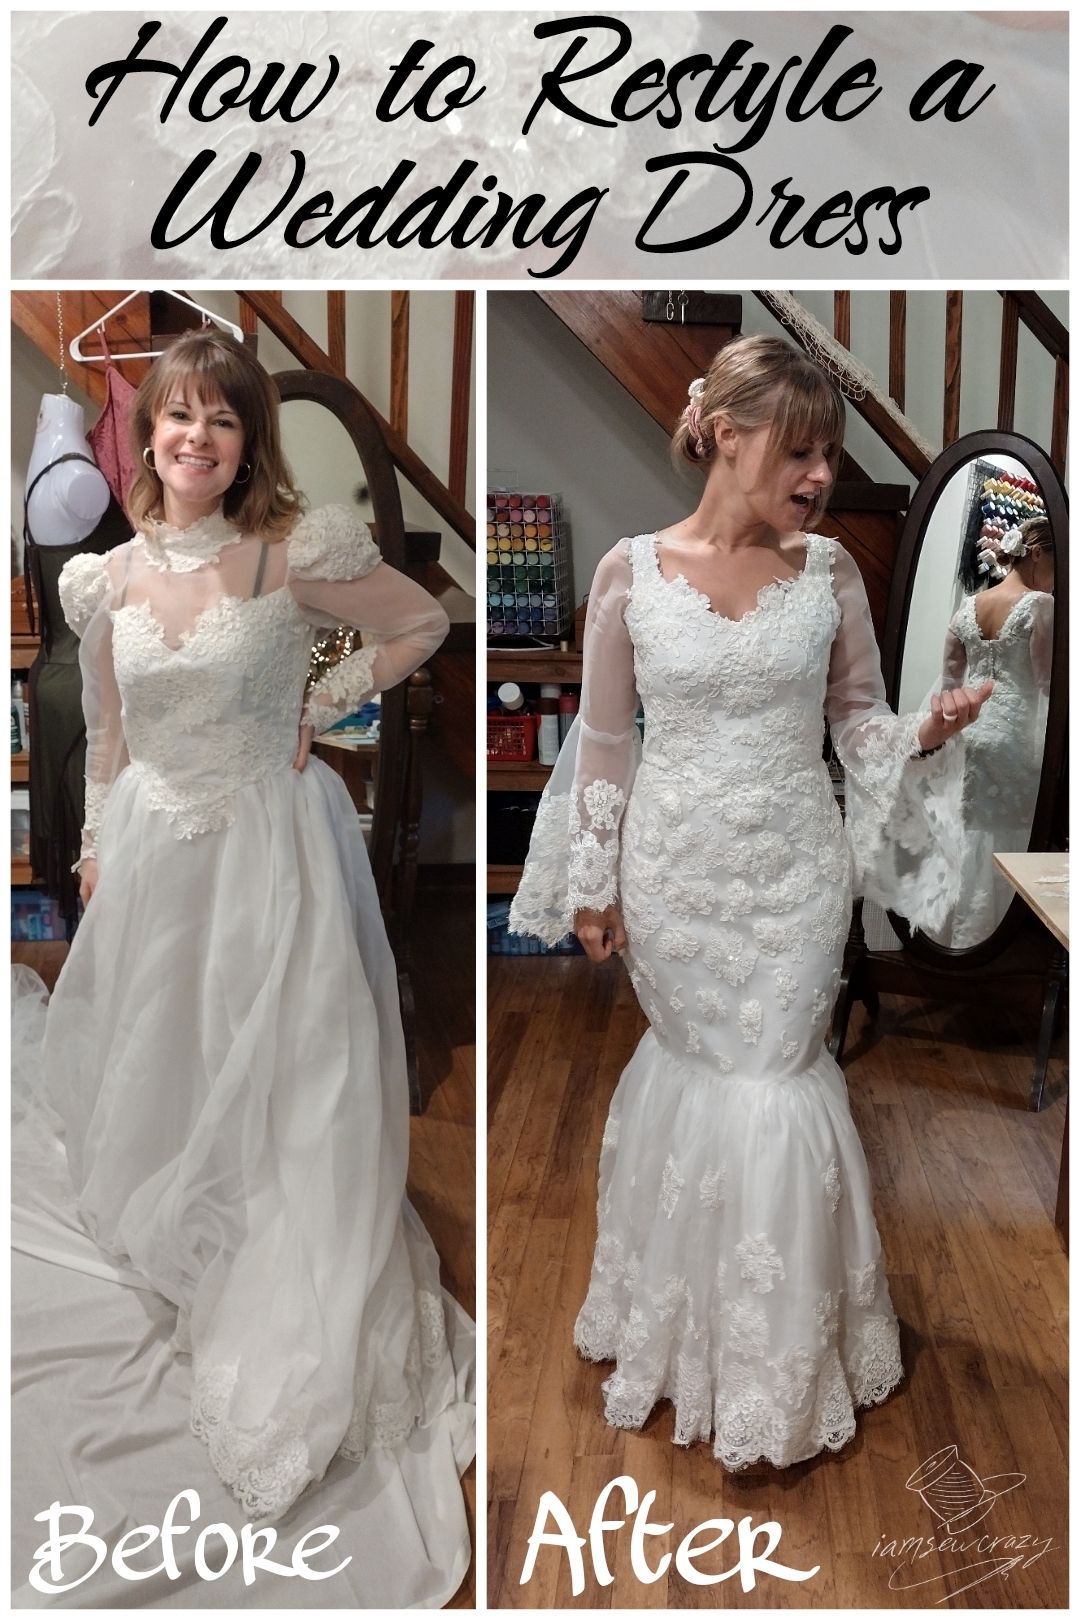 victorian style vintage wedding dress next to mermaid style wedding dress with removable bell sleeves and text overlay: how to restyle a wedding dress